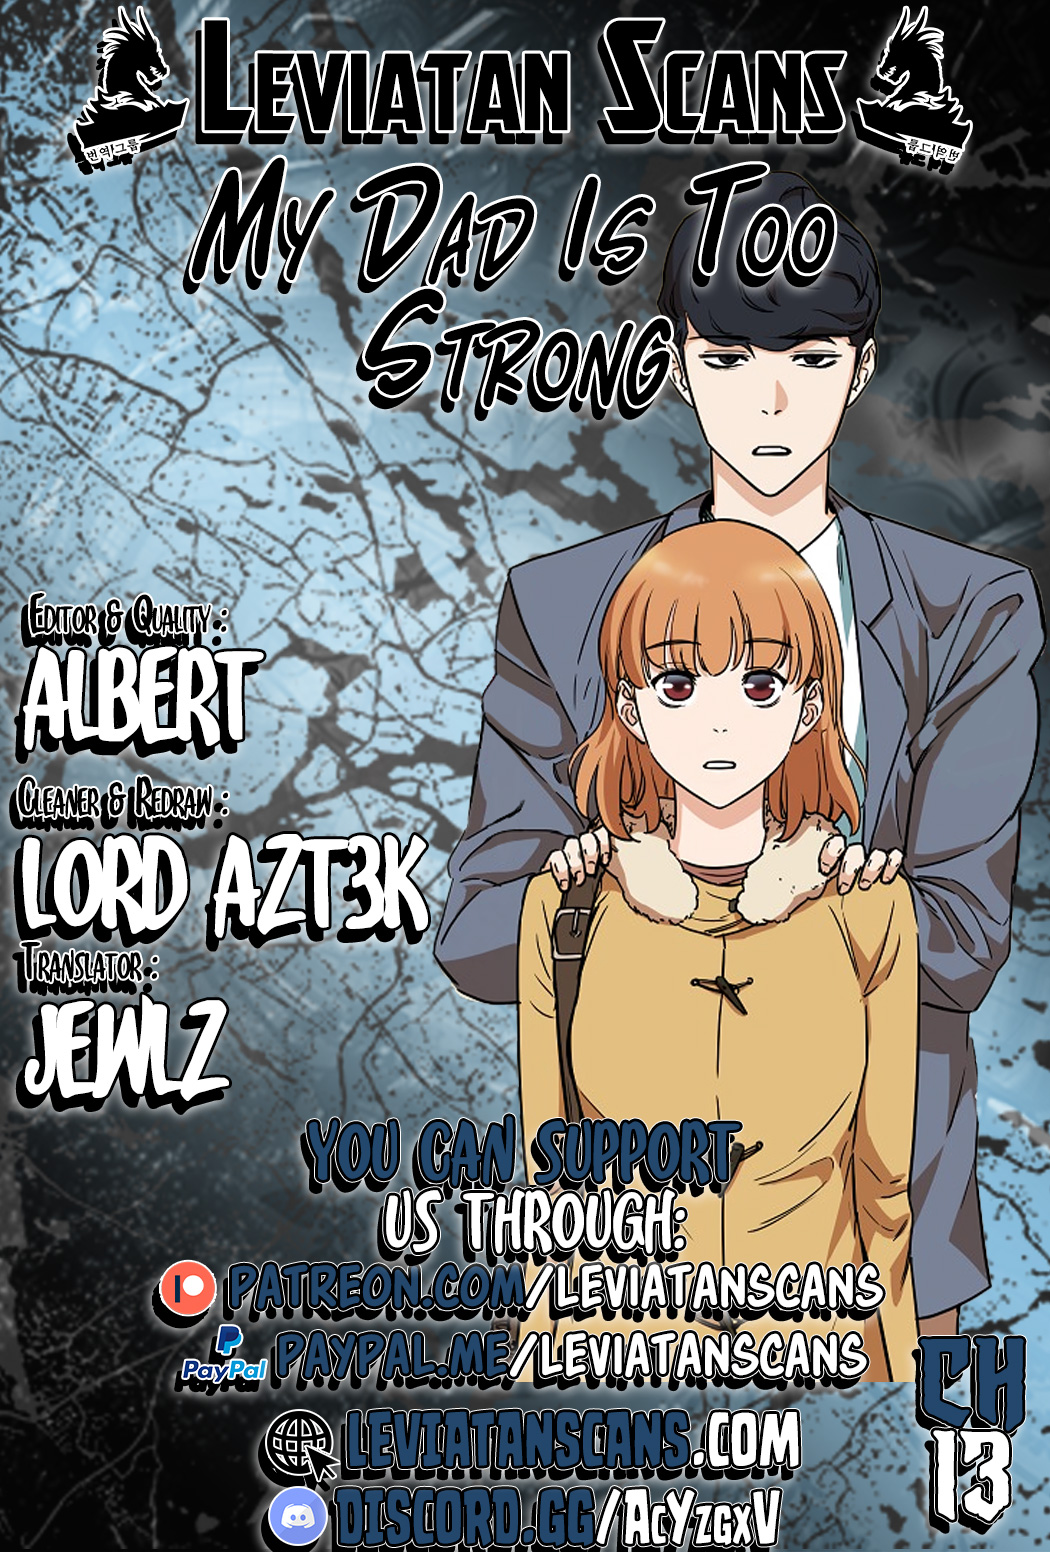 My Dad is Too Strong - Chapter 2592 - Image 1